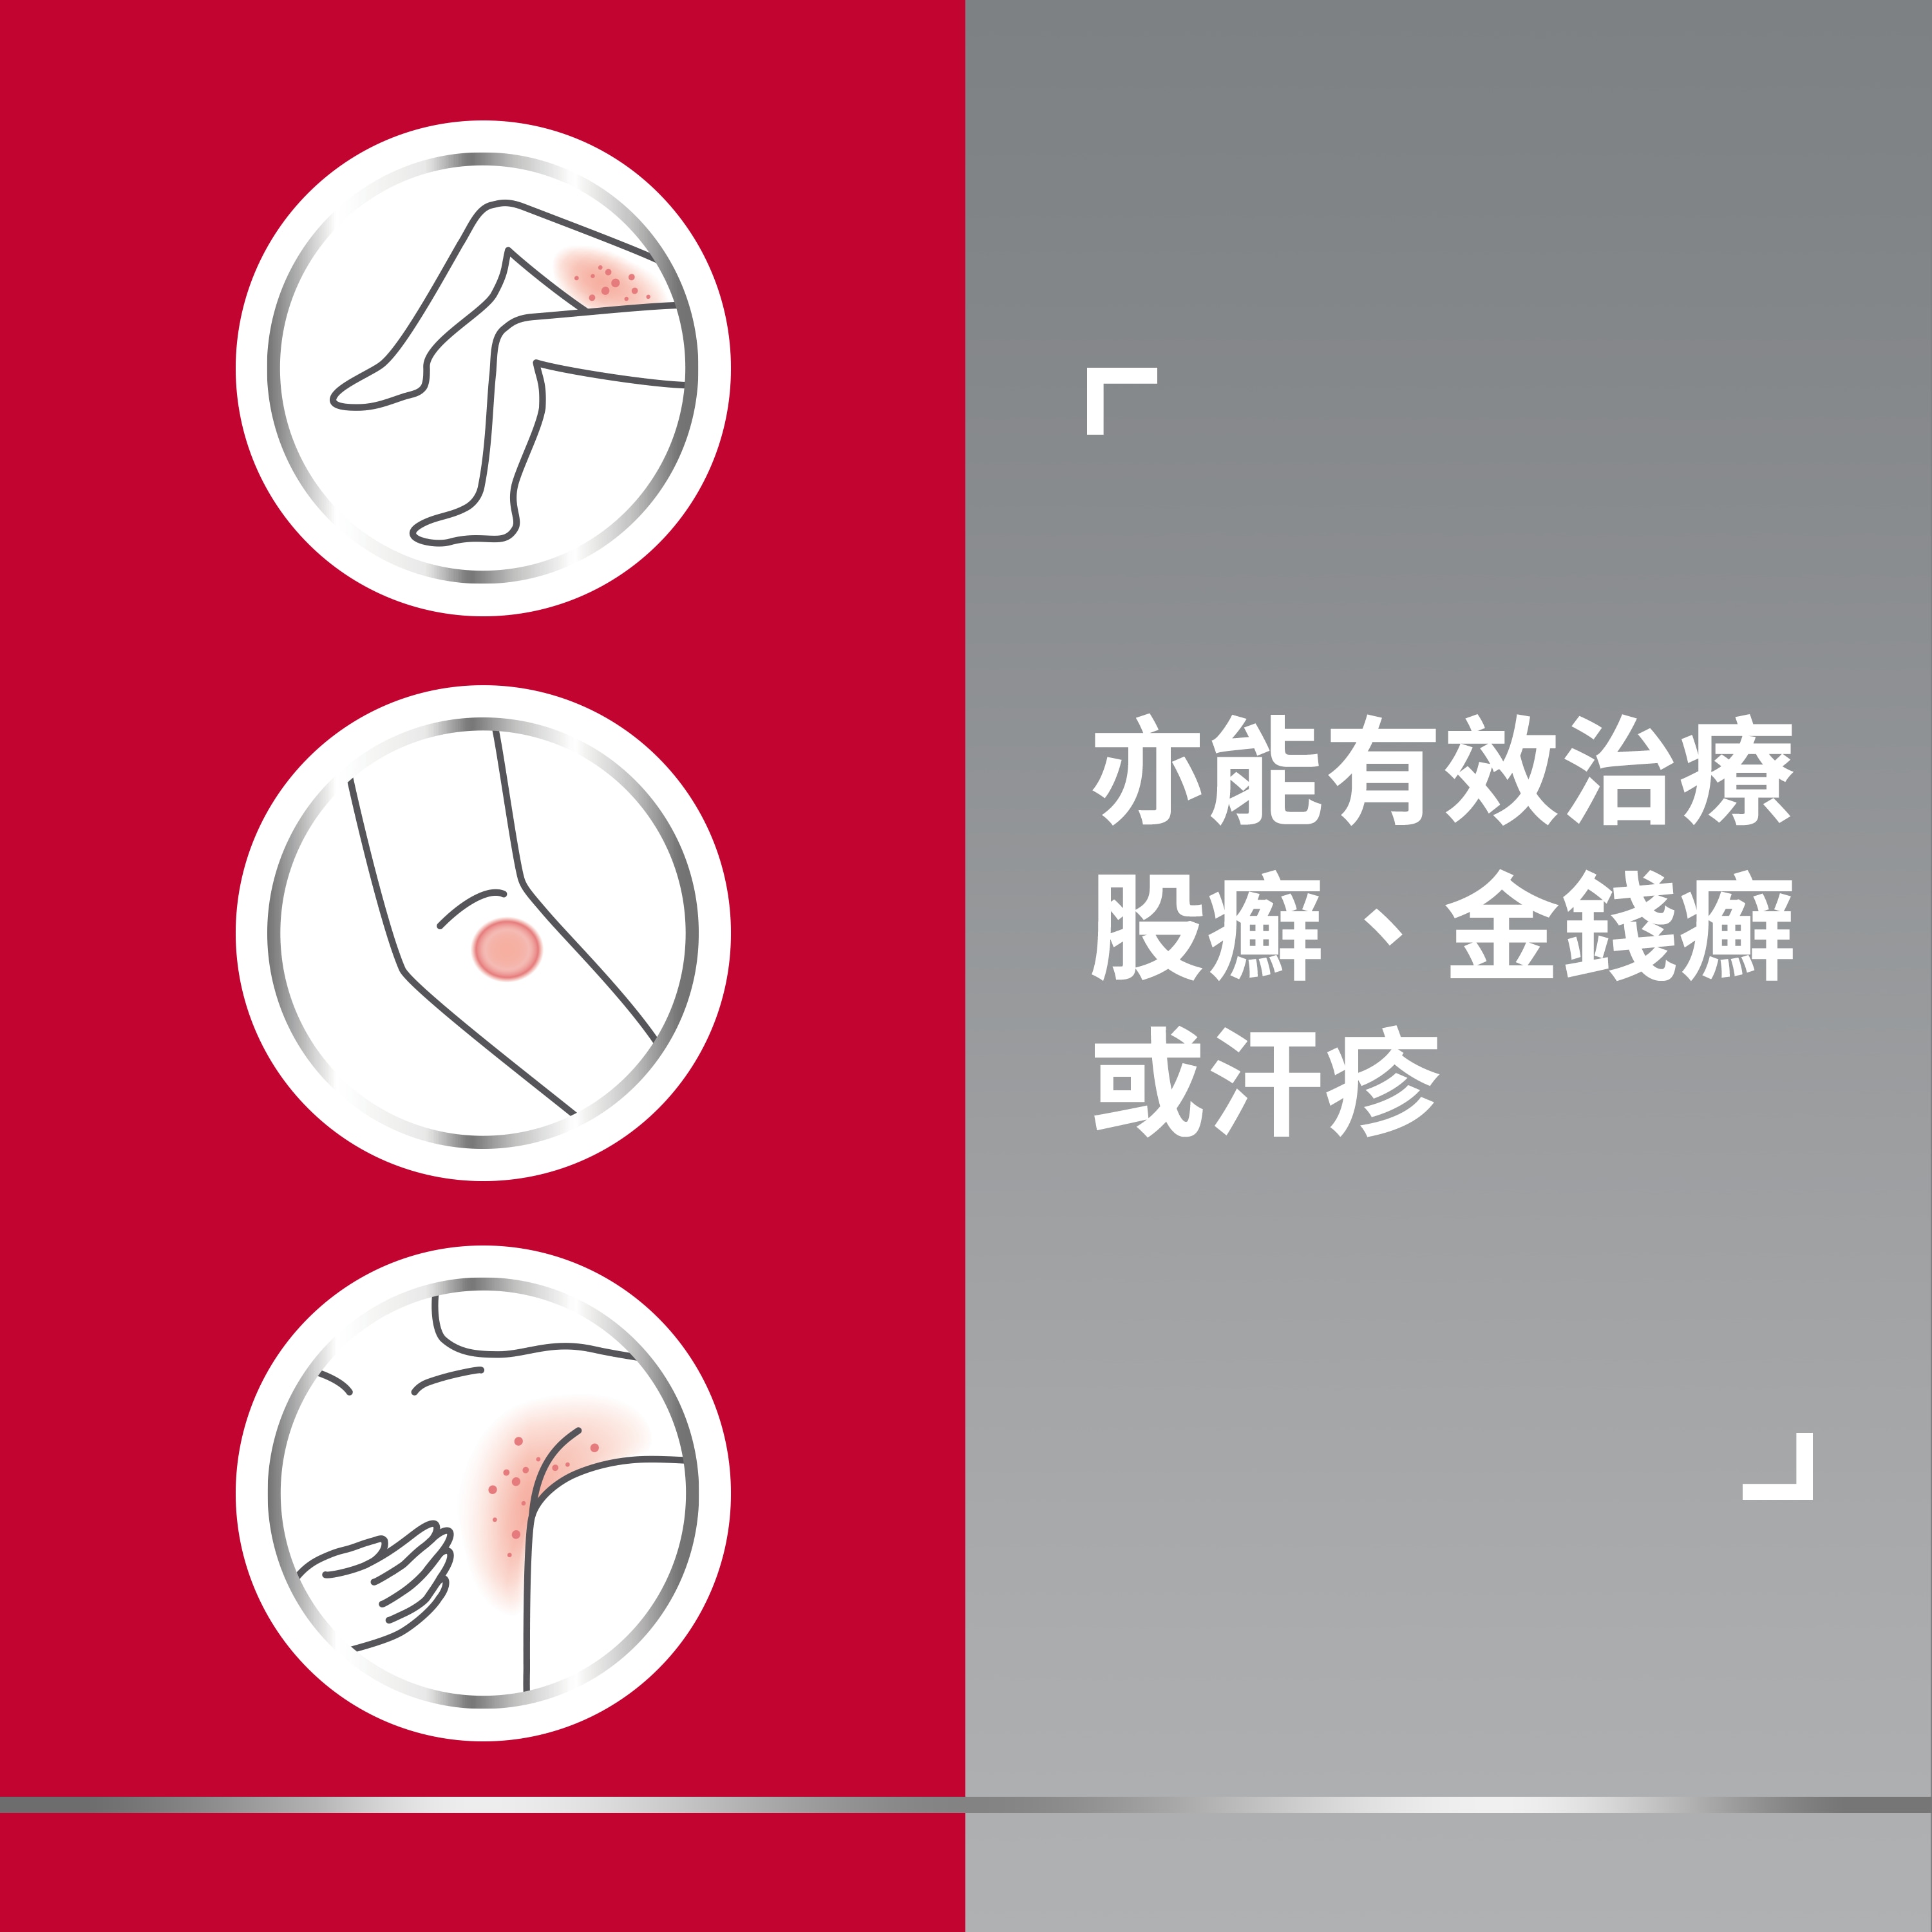 Three icons of itchy patches on inner thigh, elbow, and armpit, with caption on the right: Also effective on jock itch, ringworm or sweat rash 